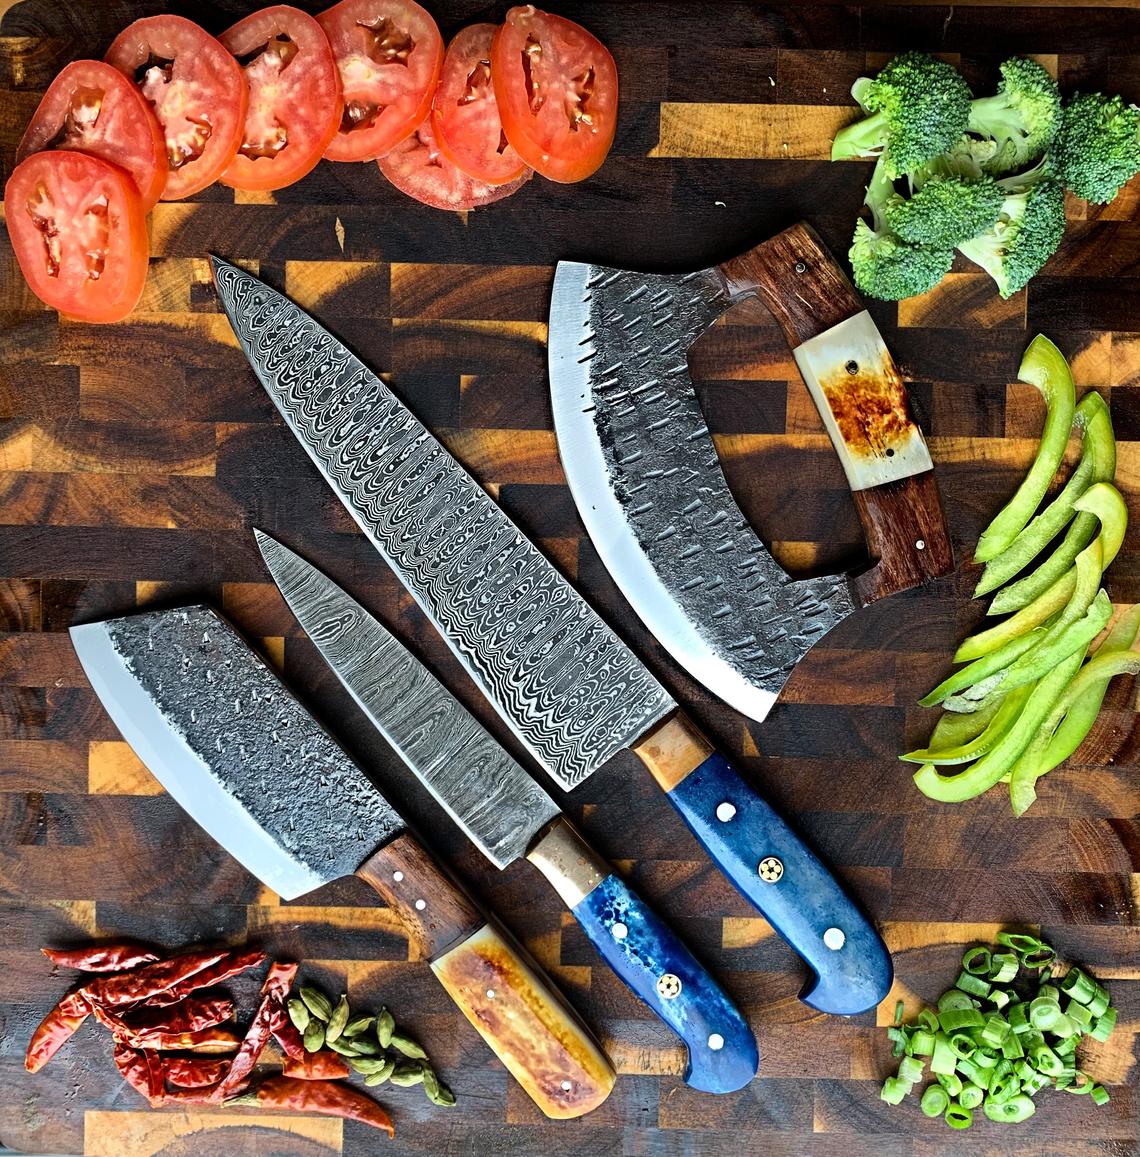 CUTLINX Kitchen Gifts for Men - Unique Gifts for Chef - Cooking Gifts for Him - Housewarming Gifts for Men - Kitchen Knife Gift Set